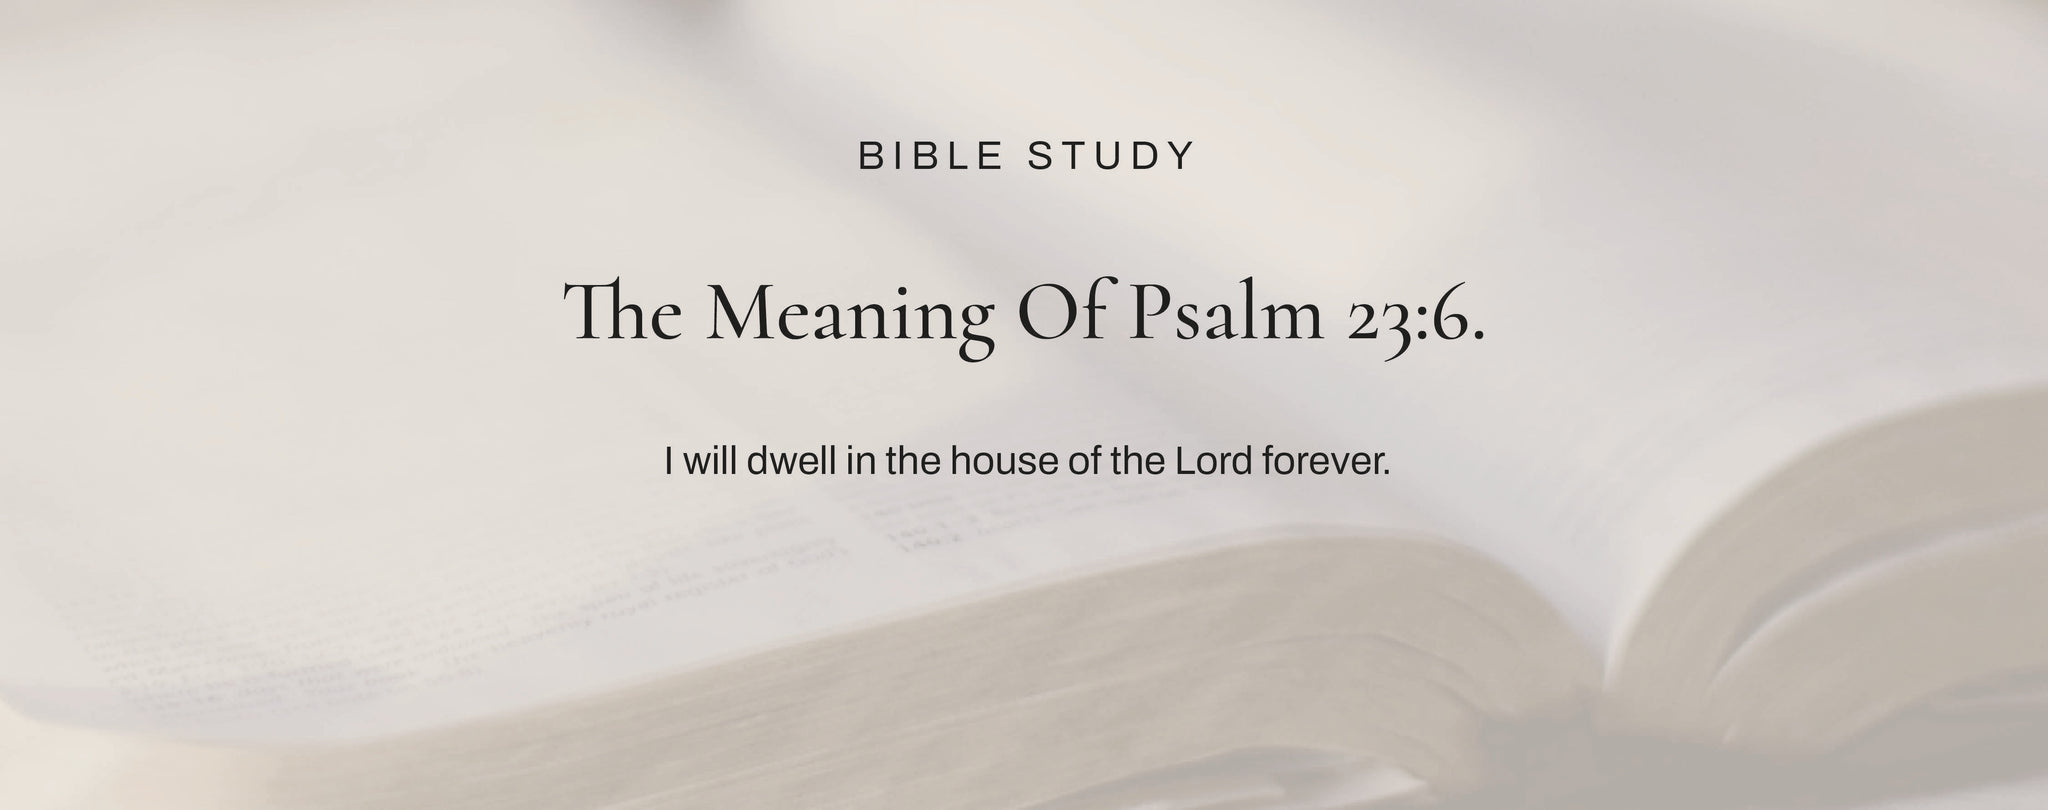 What Does Psalm 23:6 Mean?